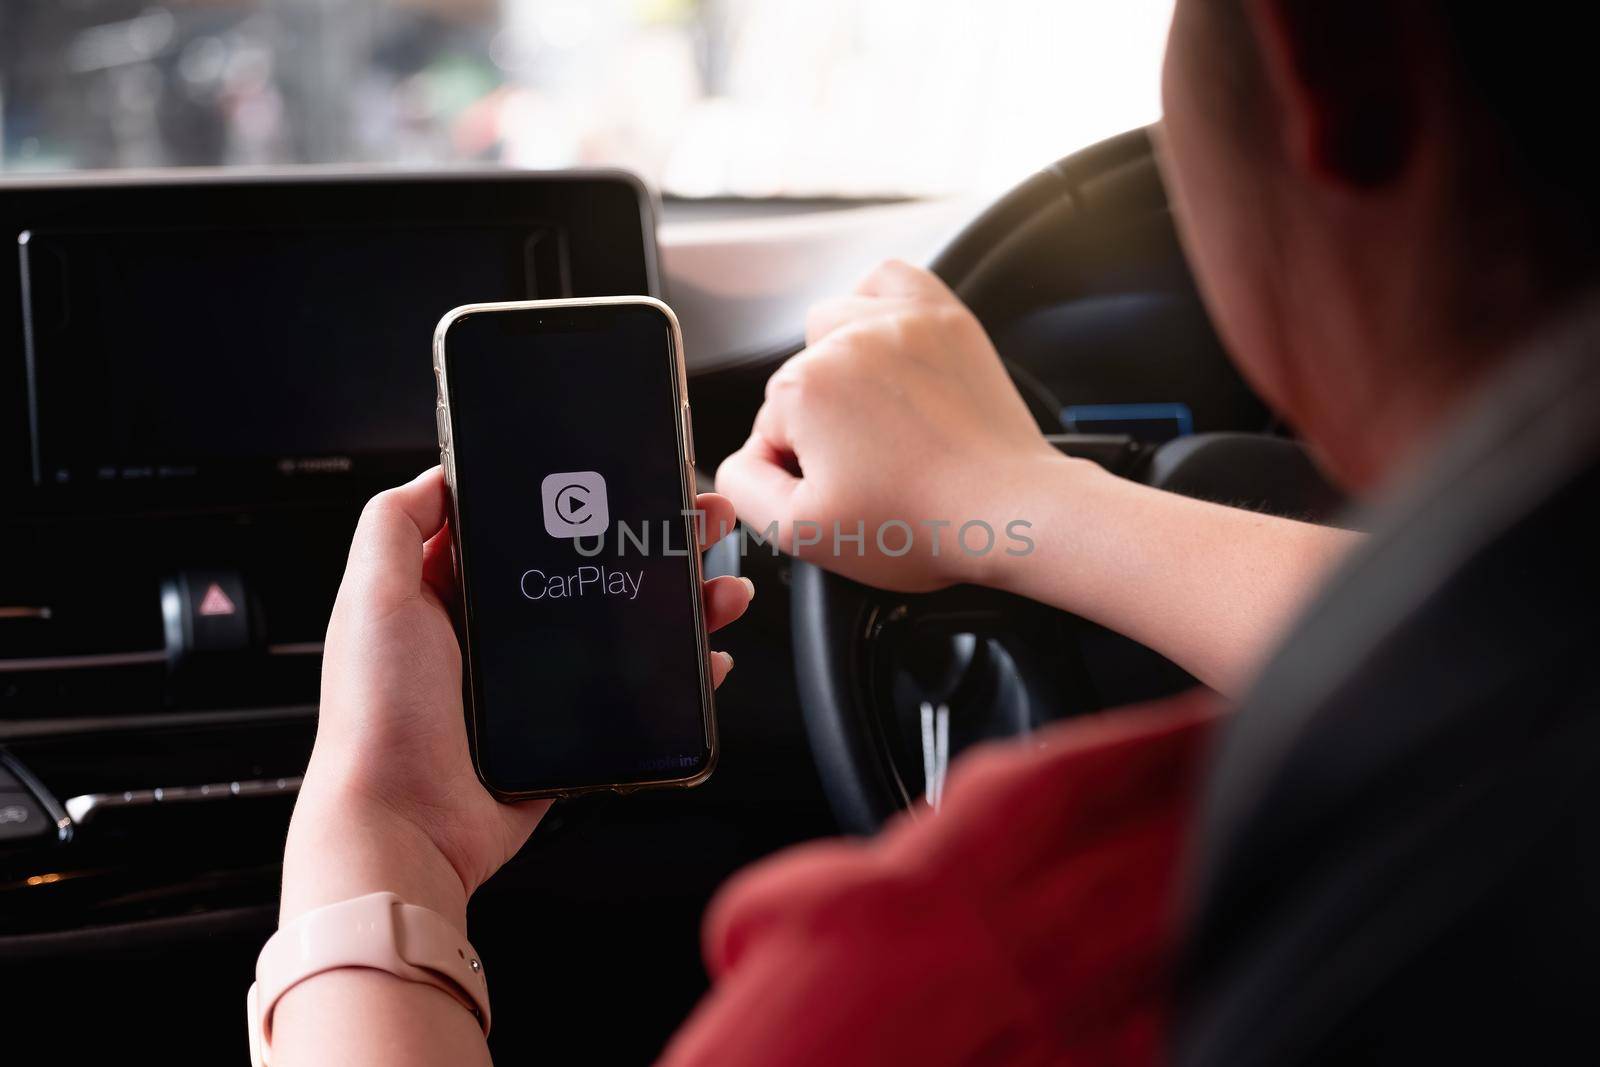 CHIANG MAI, THAILAND - MAR 28, 2021: Apple CarPlay starting up on an iPhone X connected to a new car.